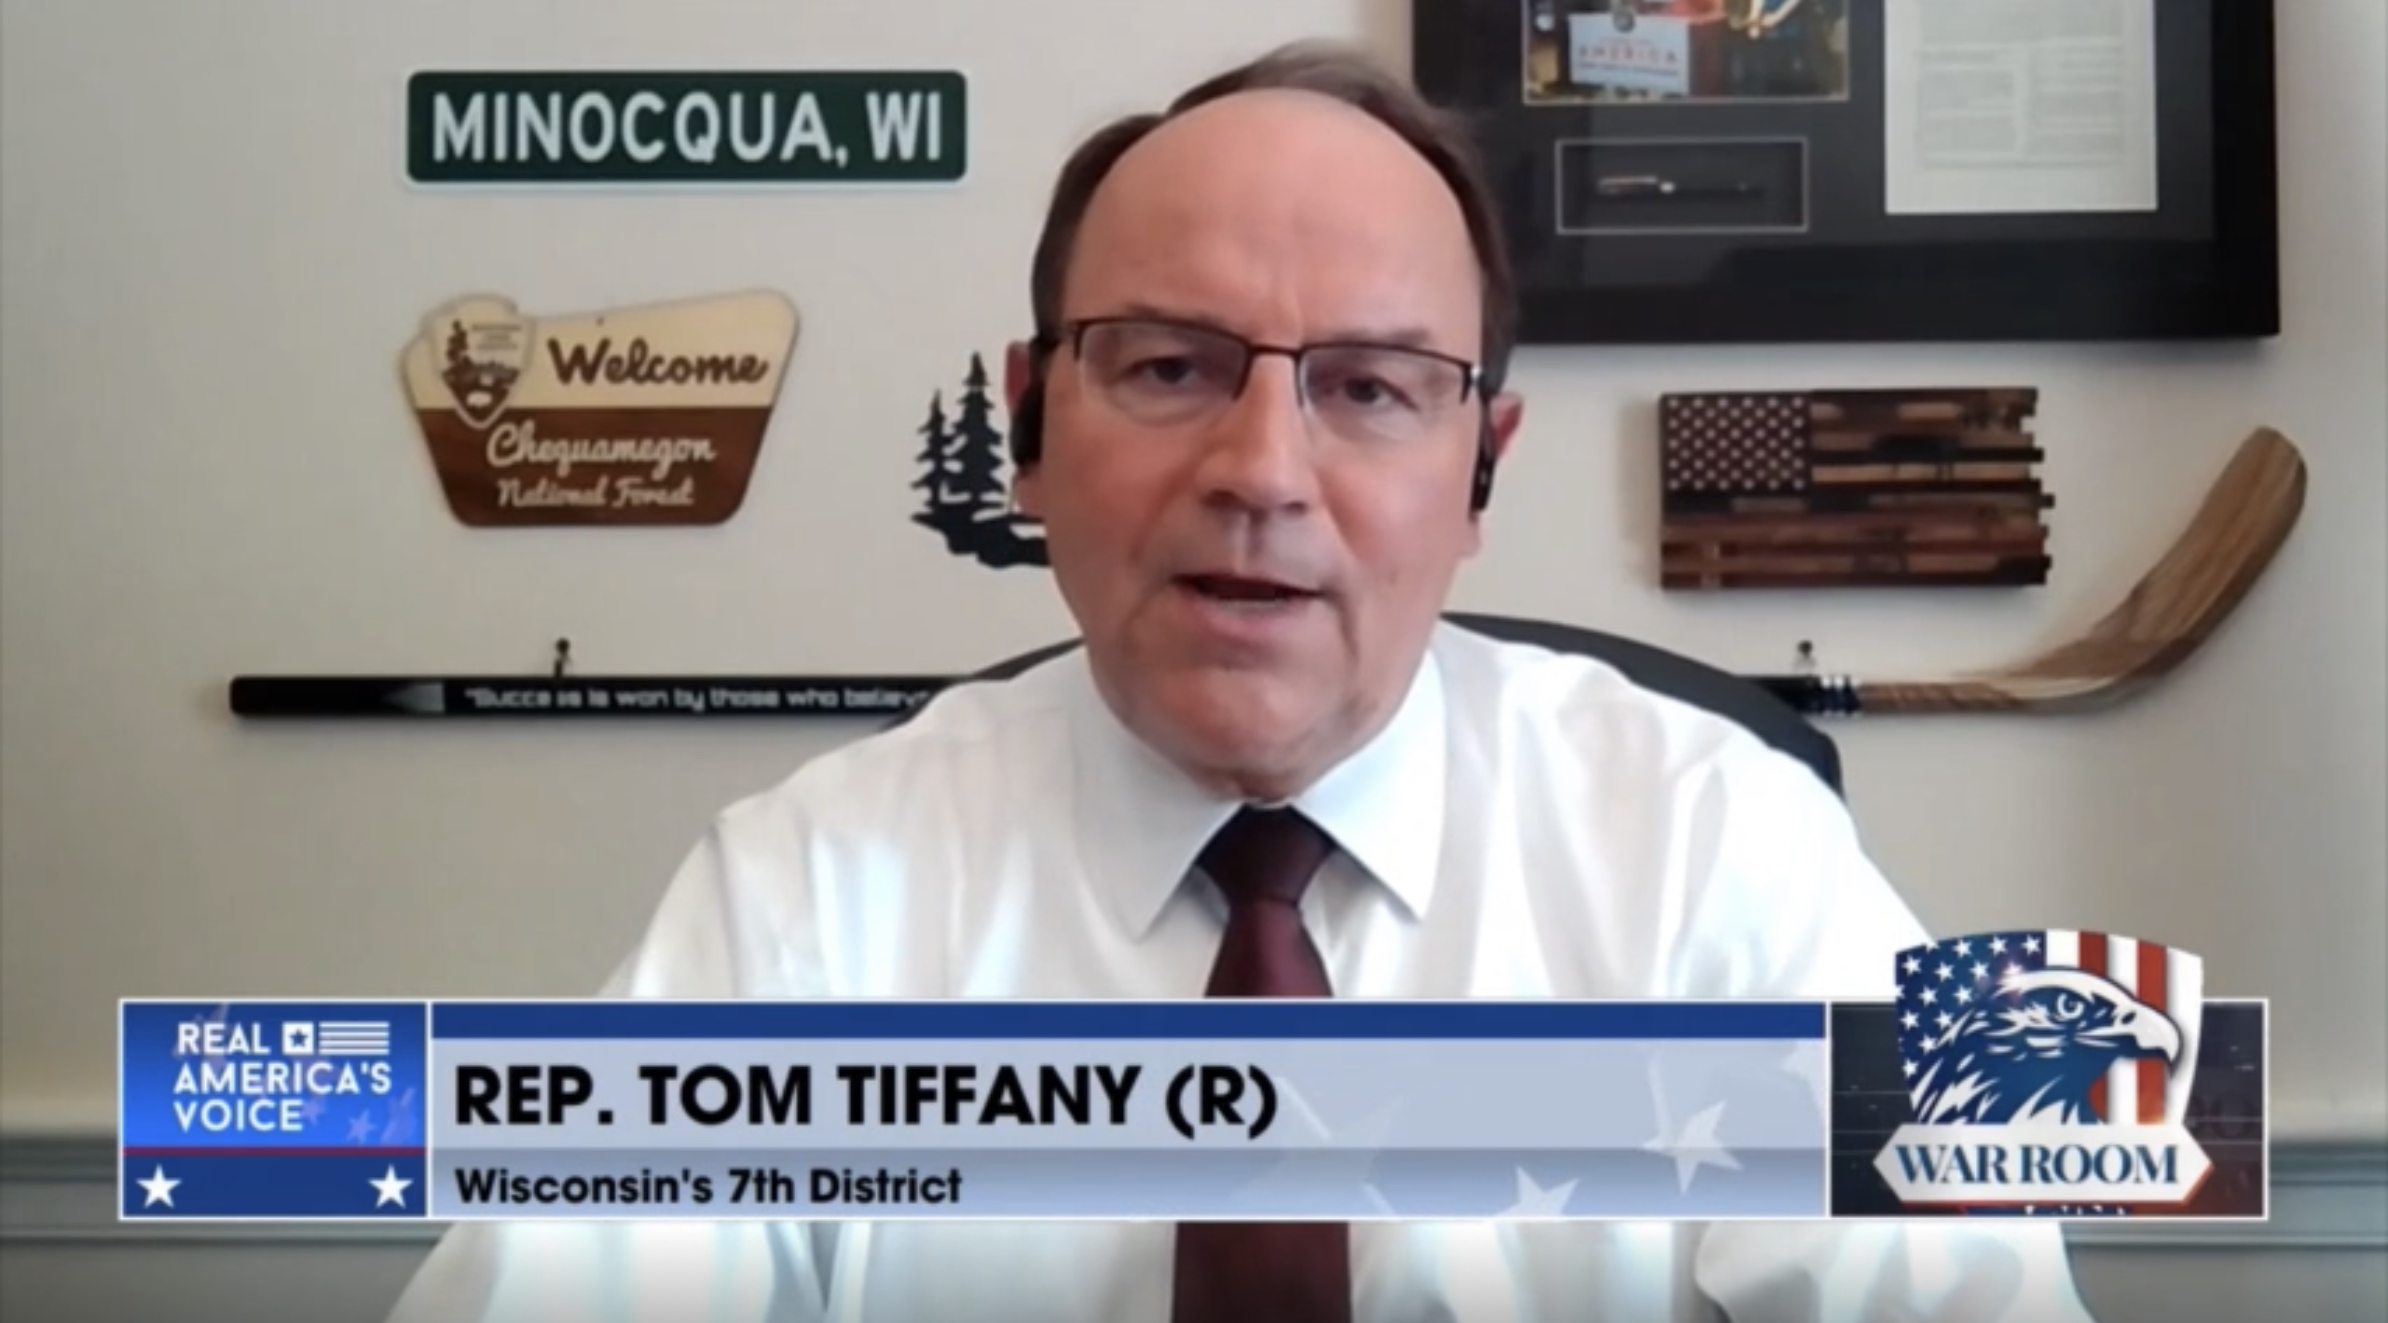 Rep. Tom Tiffany Slams Government For Being Complicit In Human Trafficking